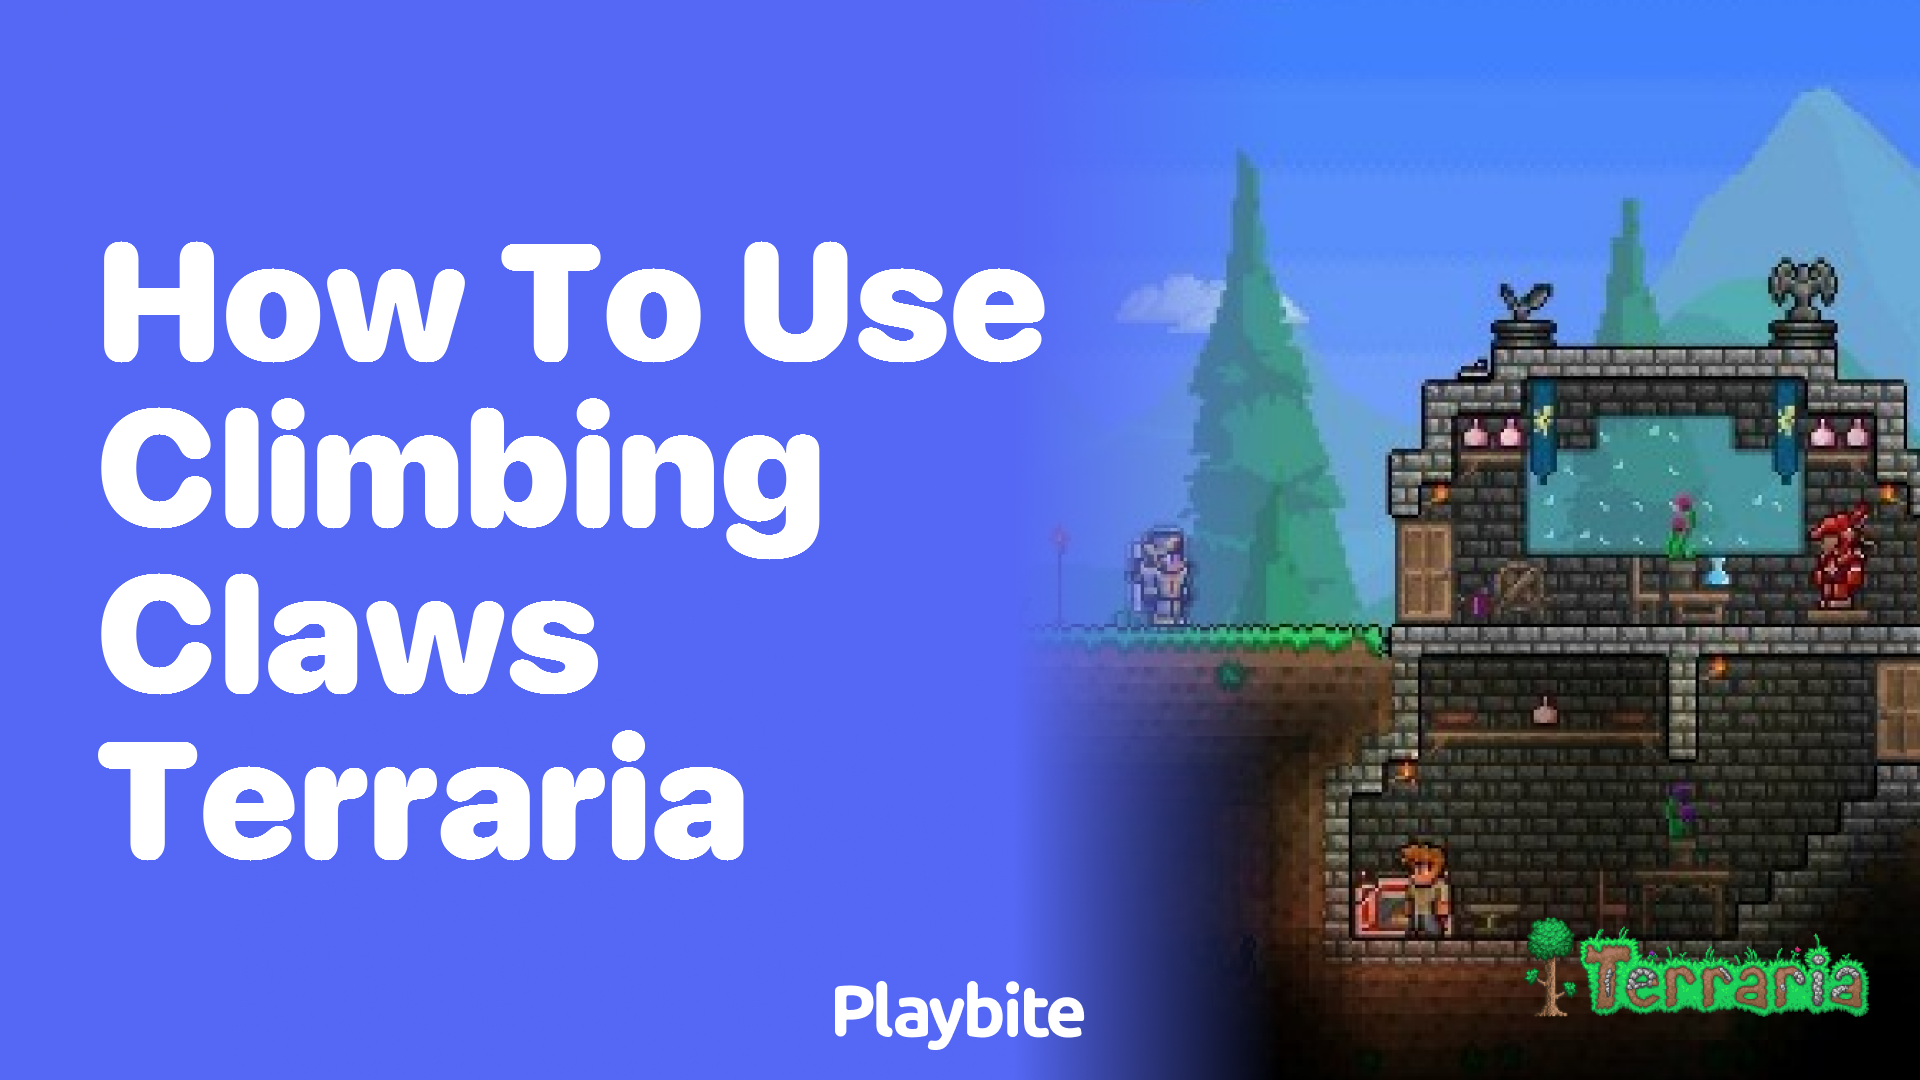 How to Use Climbing Claws in Terraria